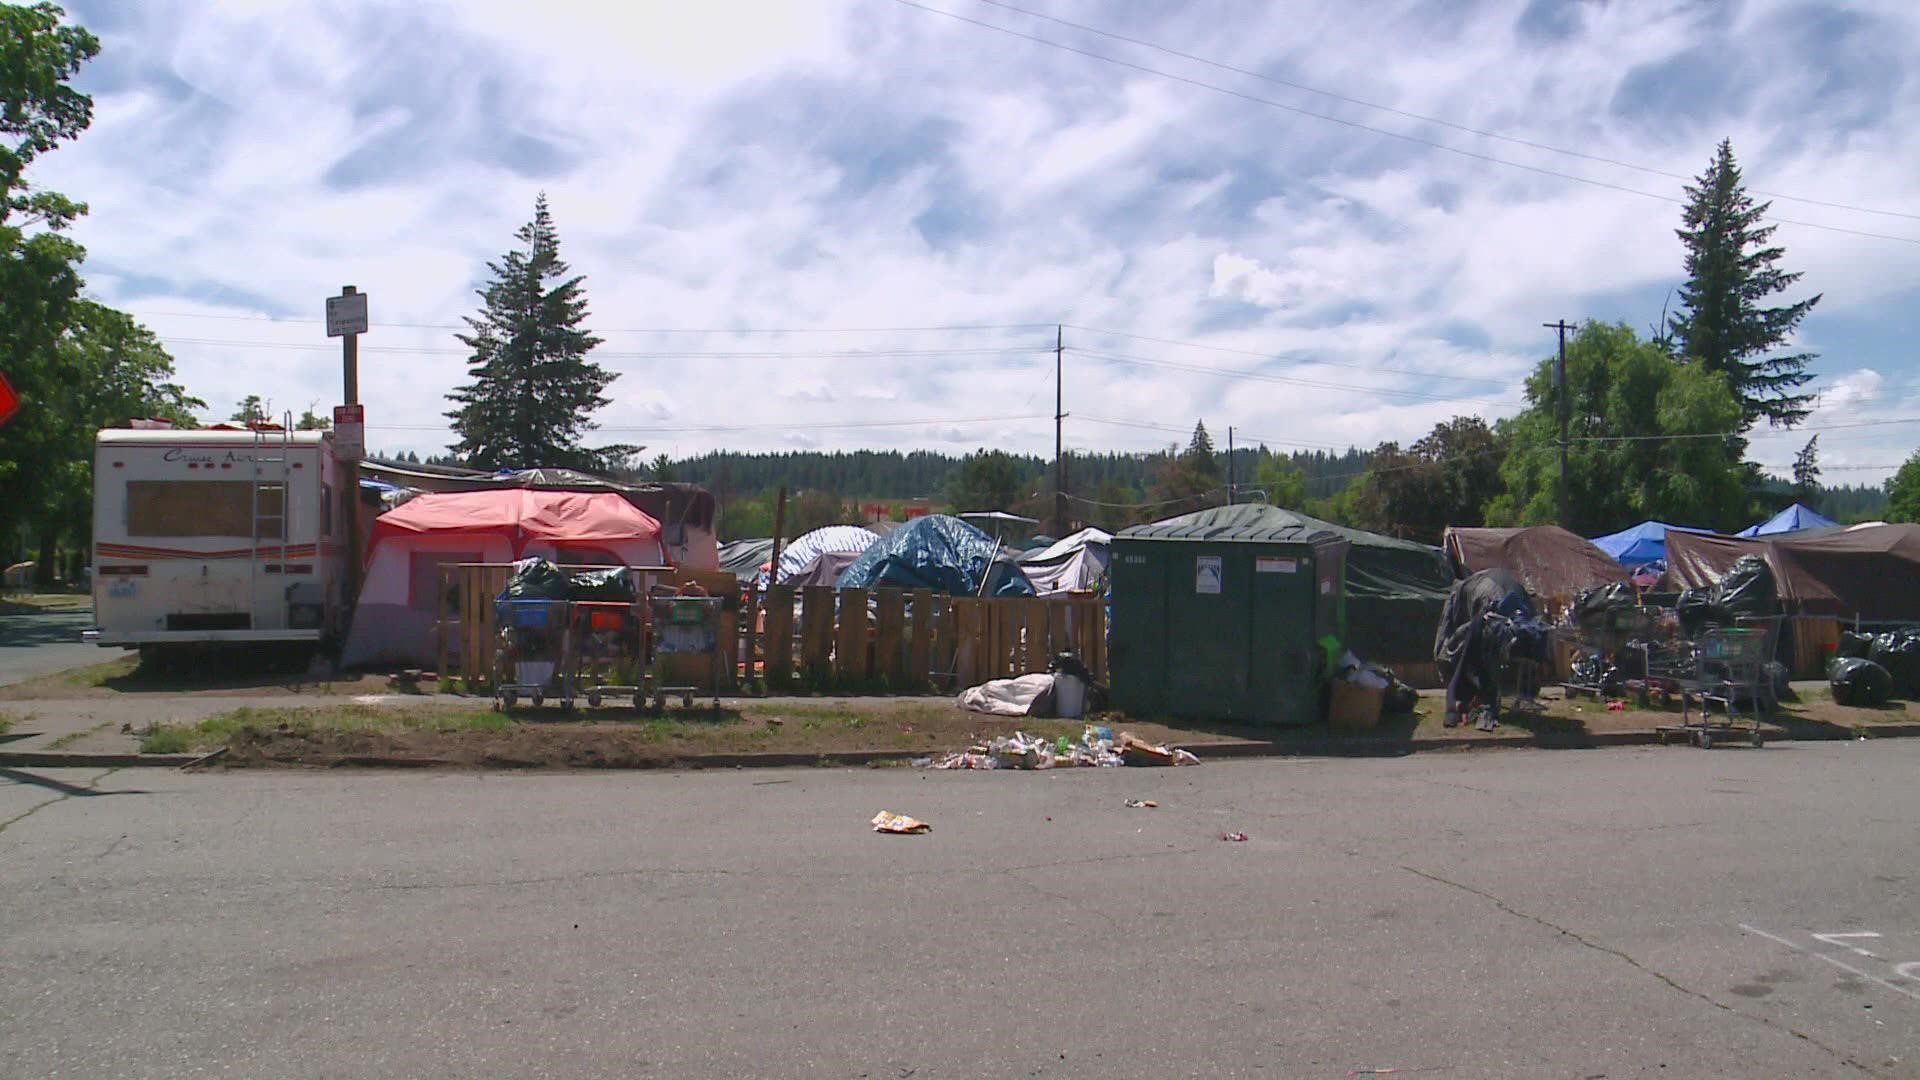 Leaders have until Thursday to come up with a plan to clear the homeless camp near I-90 and Freya if they want access to $24 million in state funding.